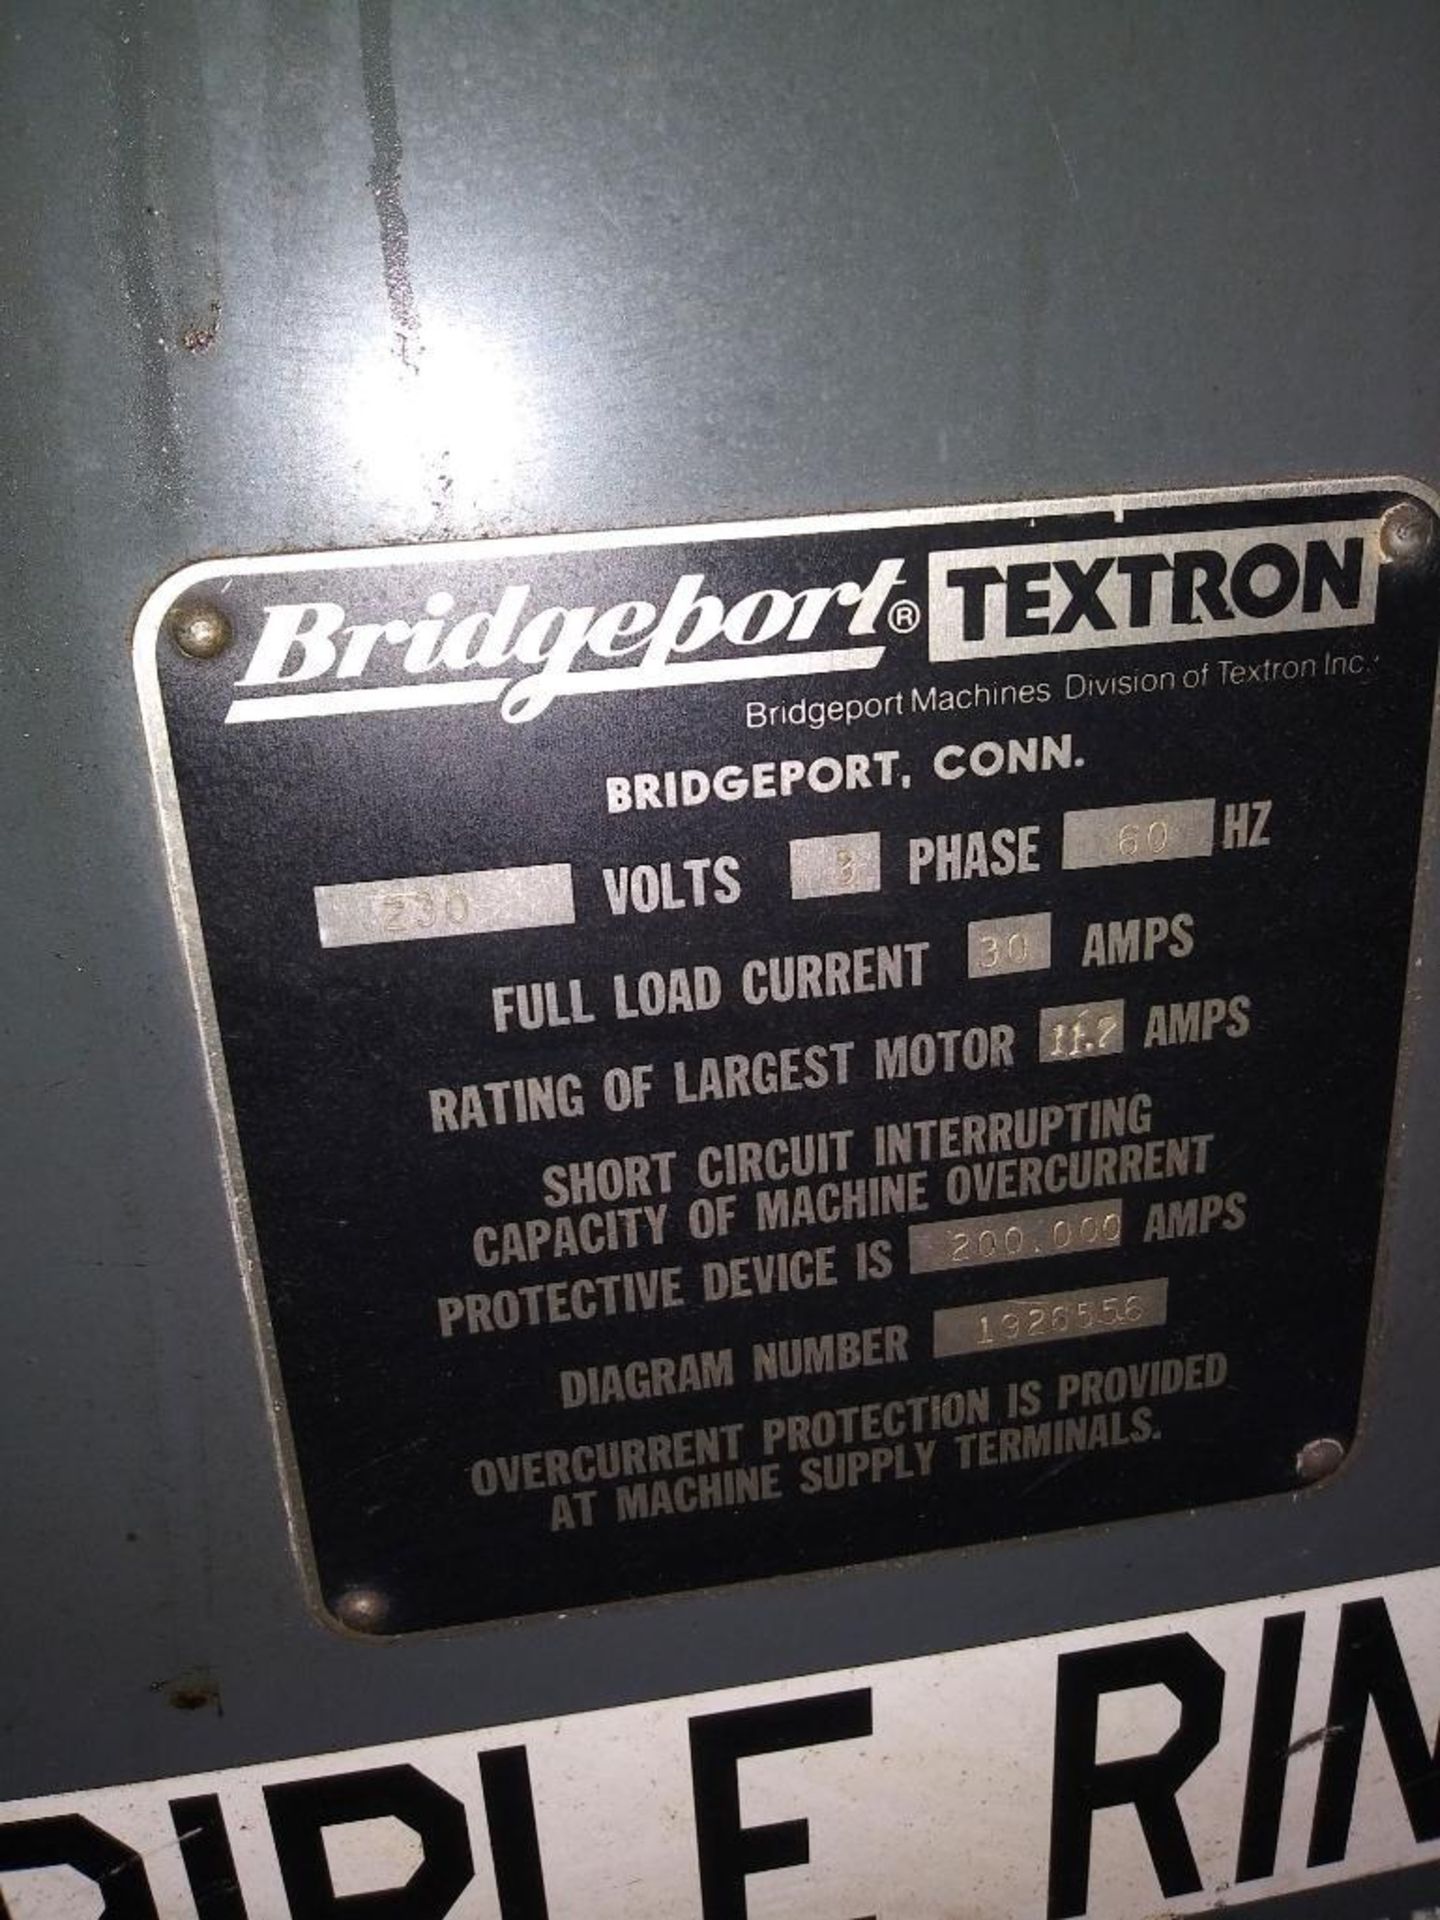 Bridgeport Series II Textron Milling Machine (Located at 2201 Hwy 31 SW, Hartselle, AL 35640) - Image 4 of 4